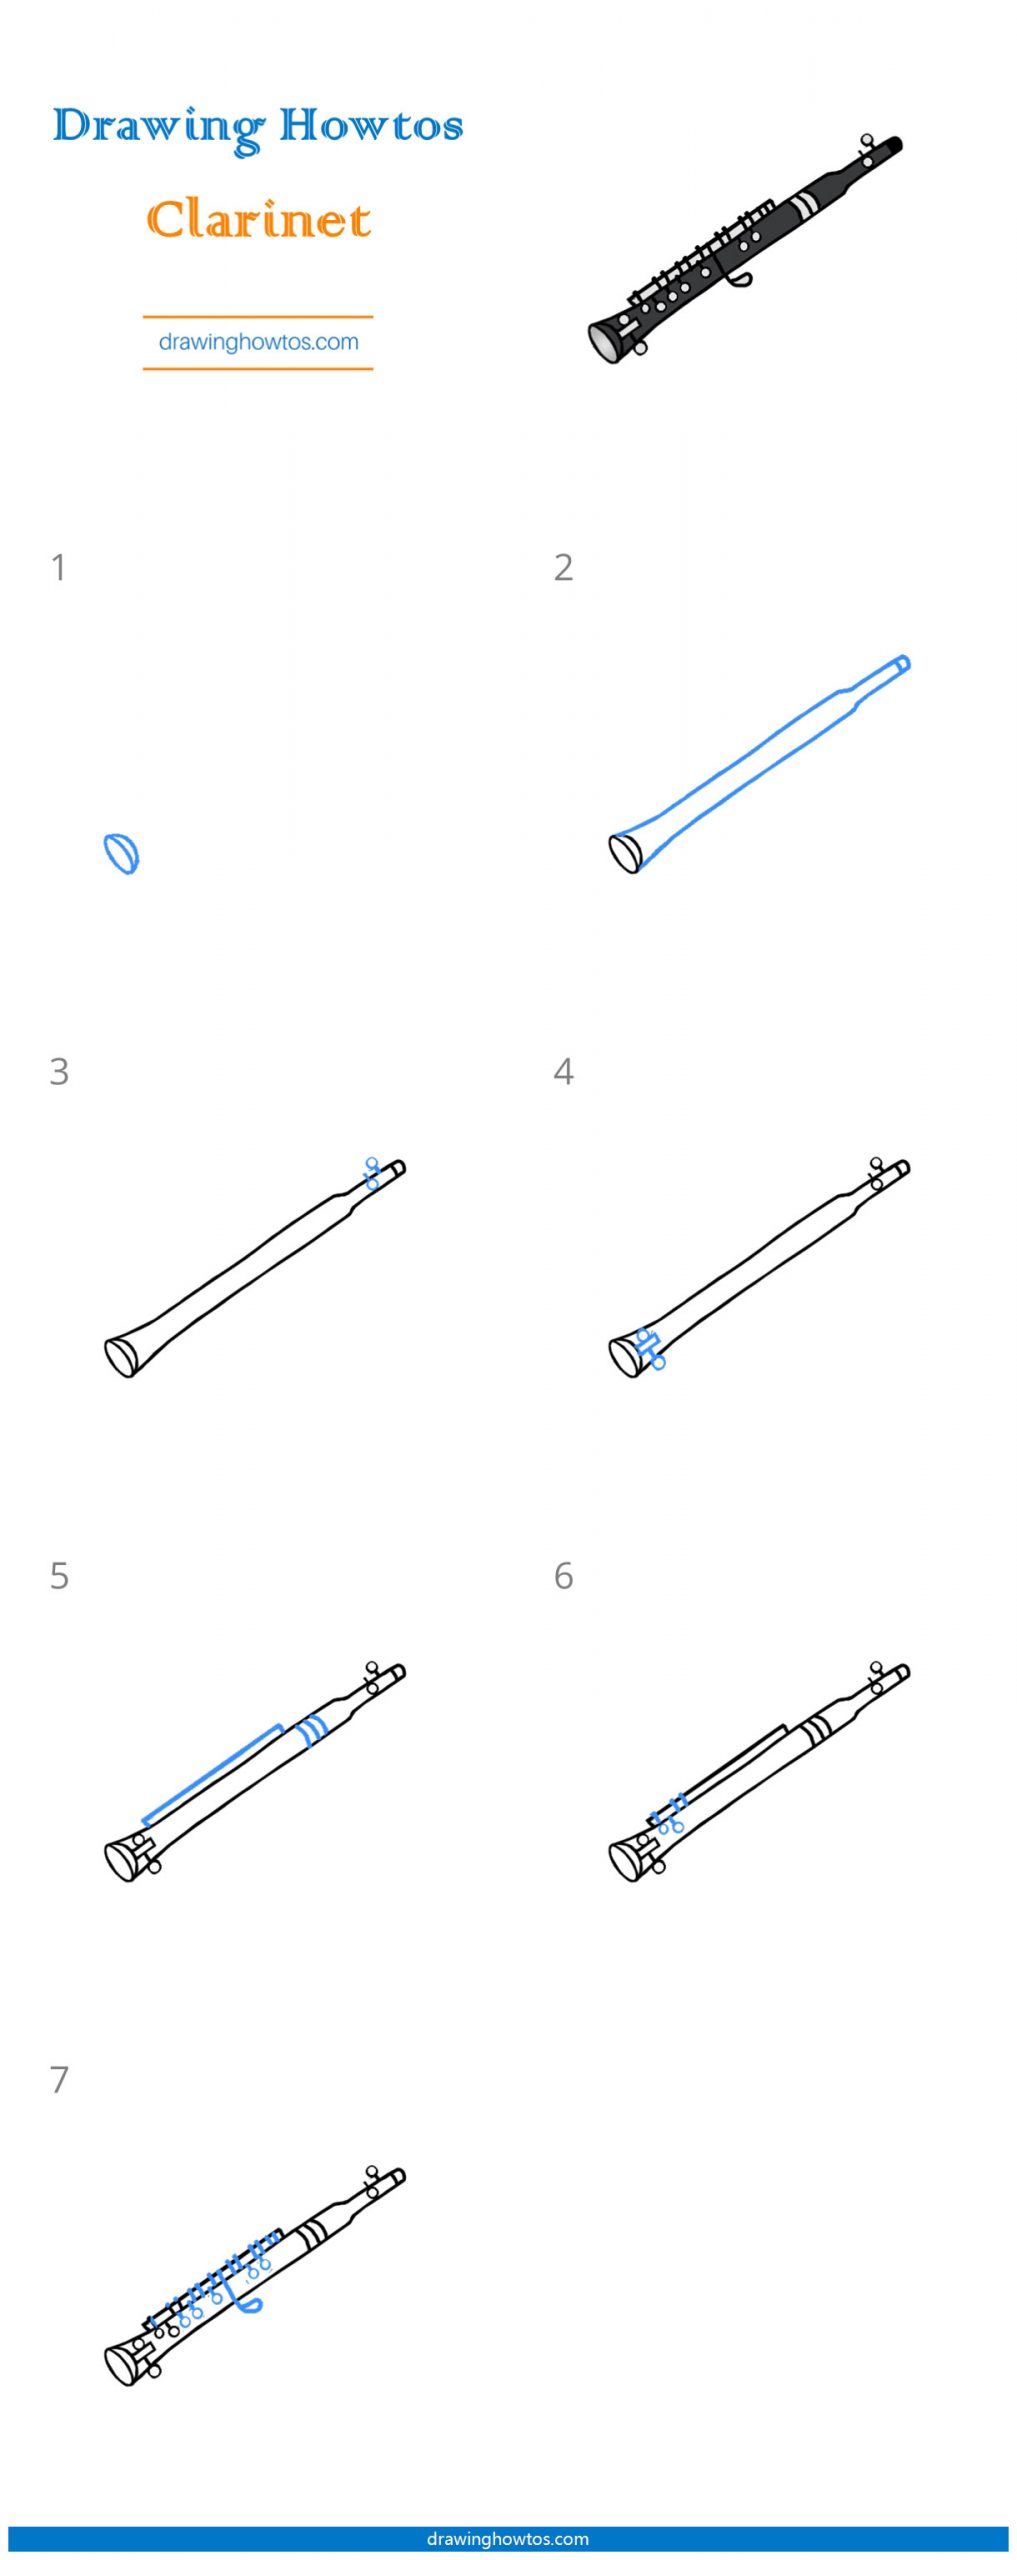 How to Draw a Clarinet Step by Step